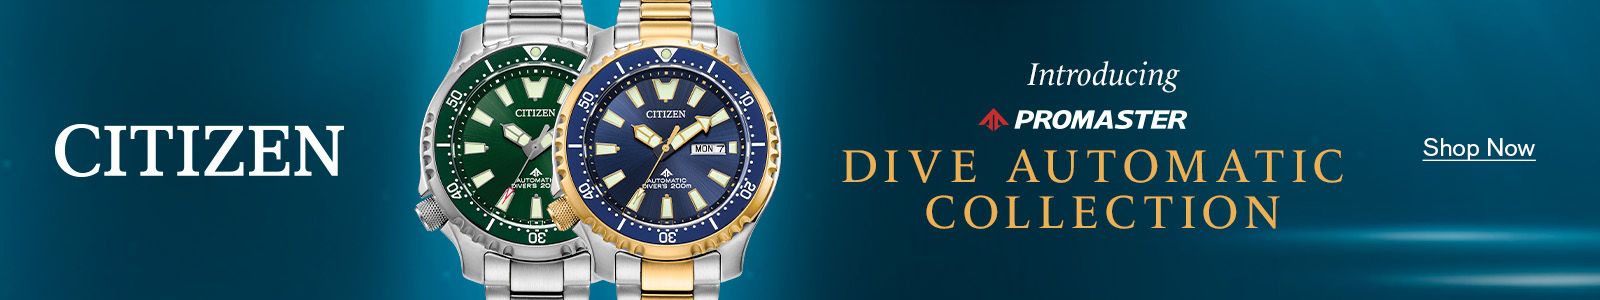 Citizen, Introducing, Promaster, Dive Automatic Collection, Shop Now